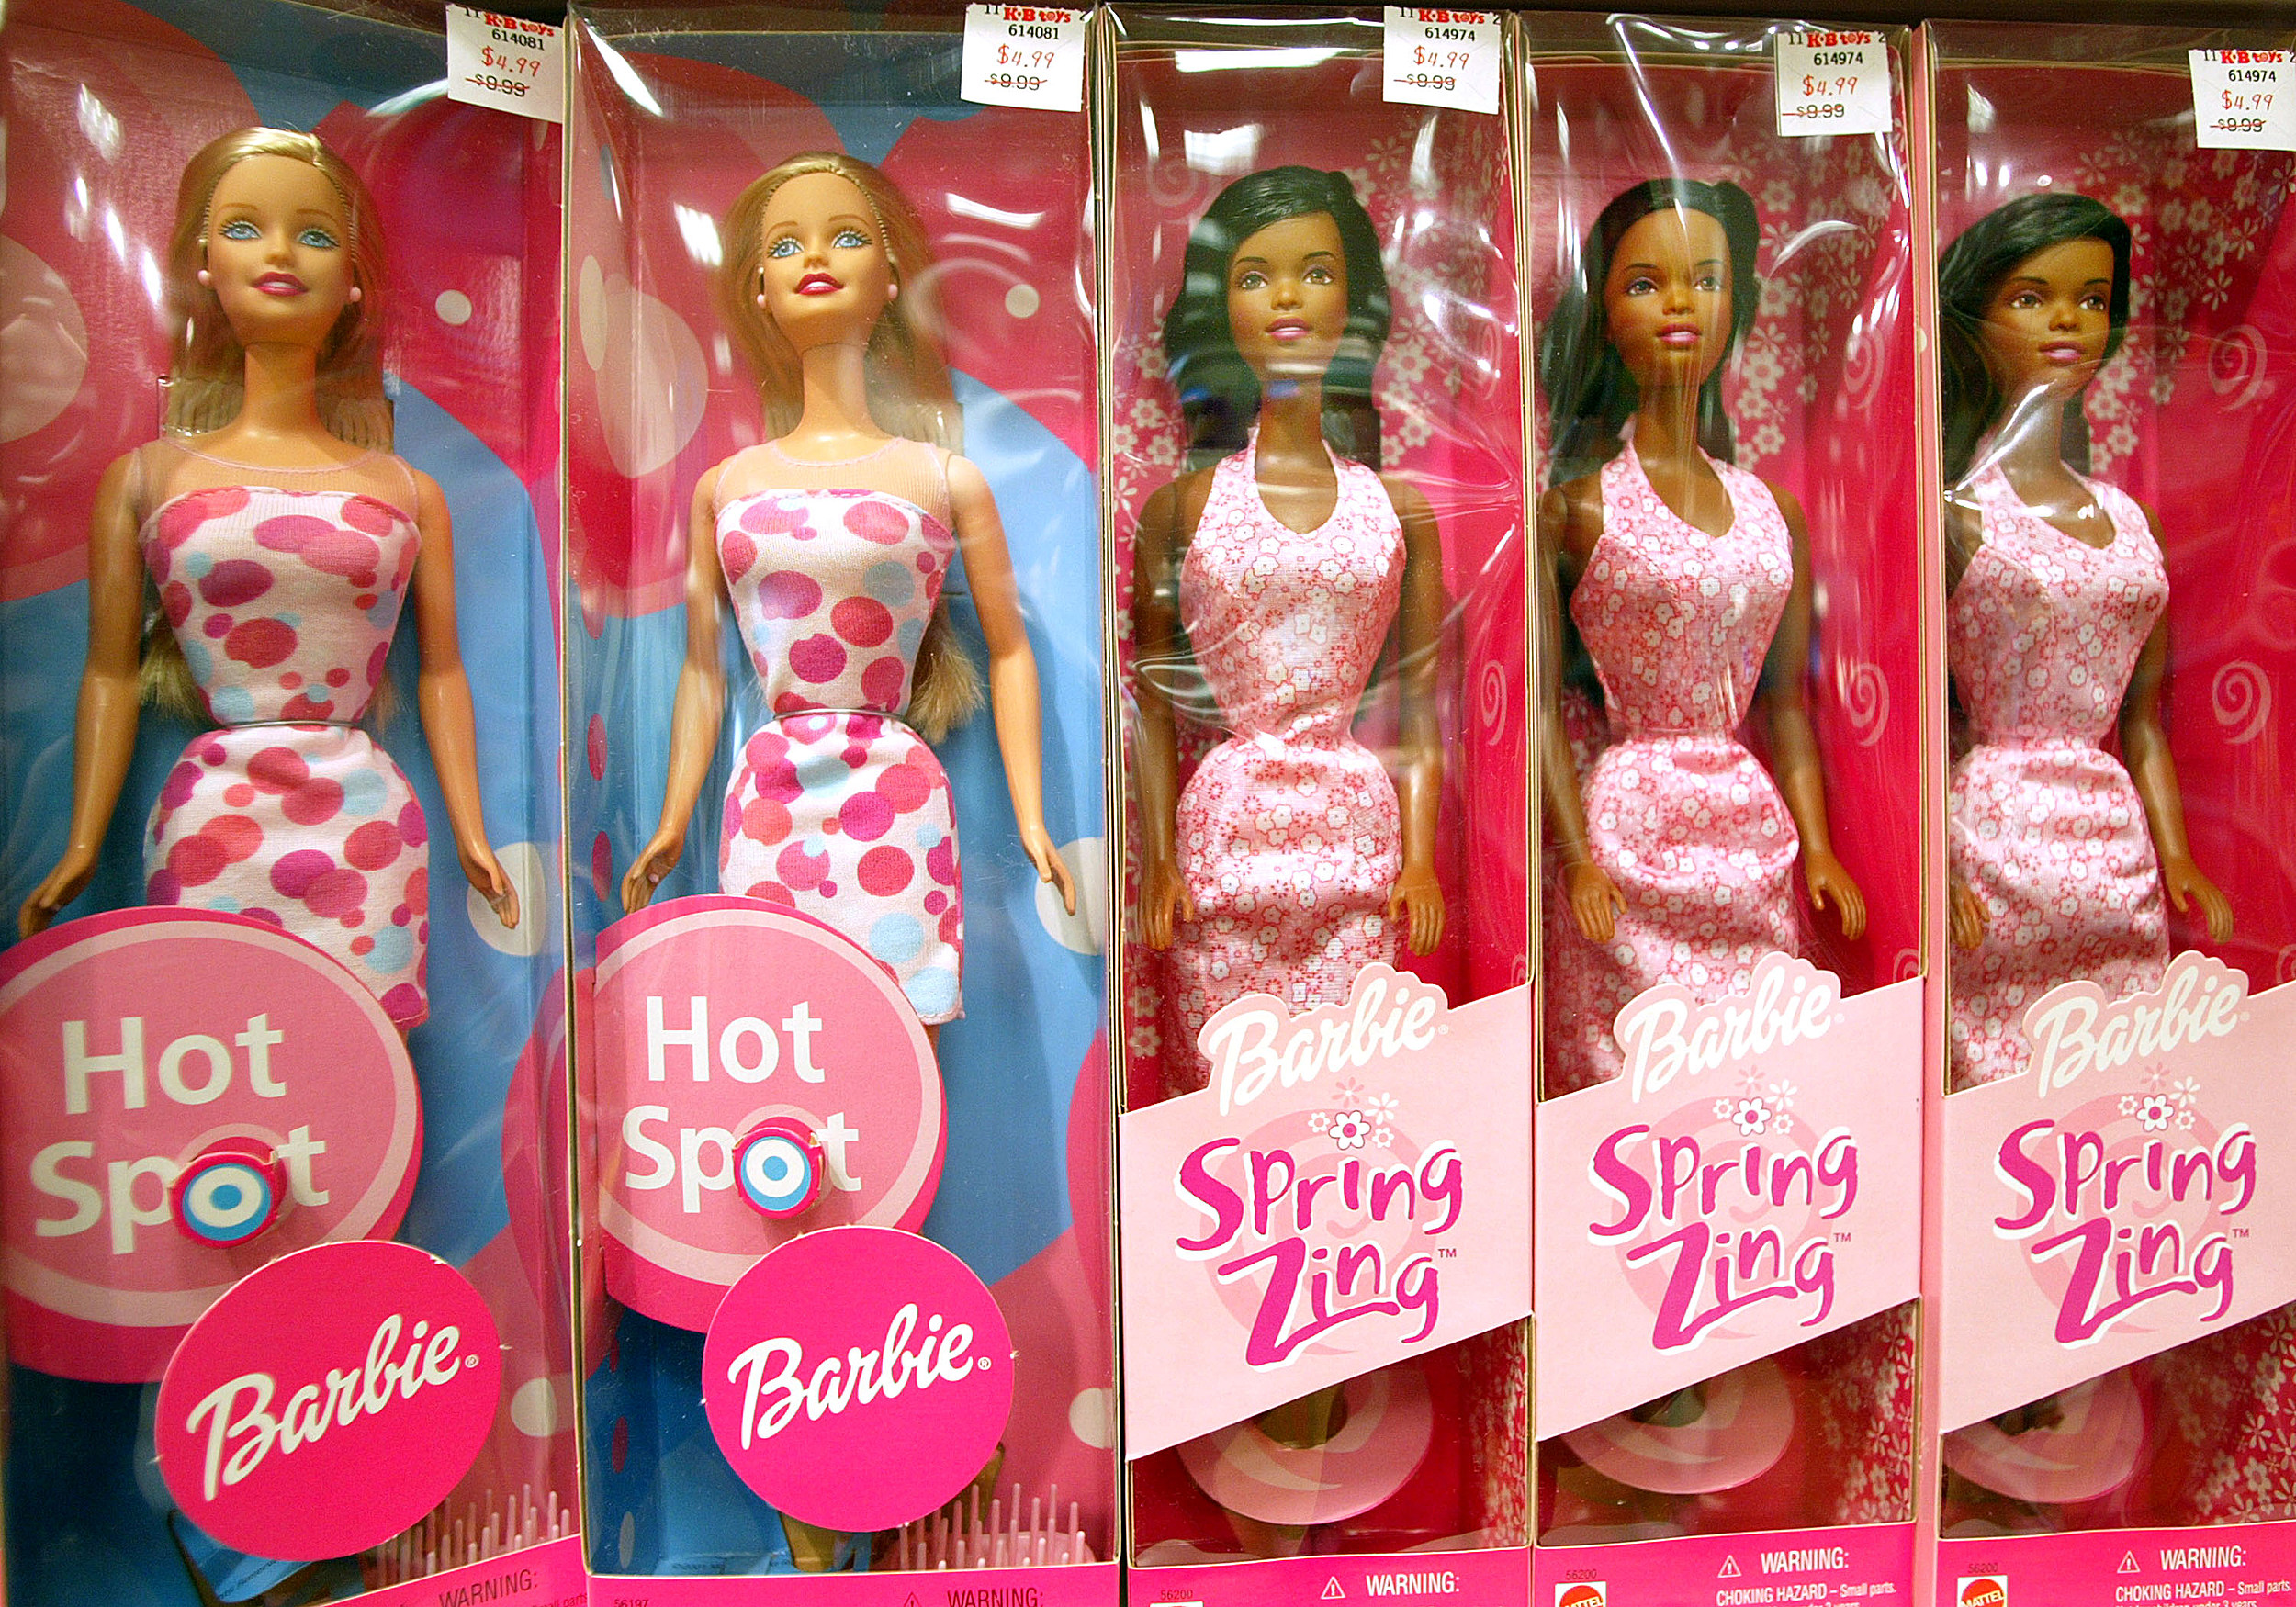 Why Do People Hate Barbie?